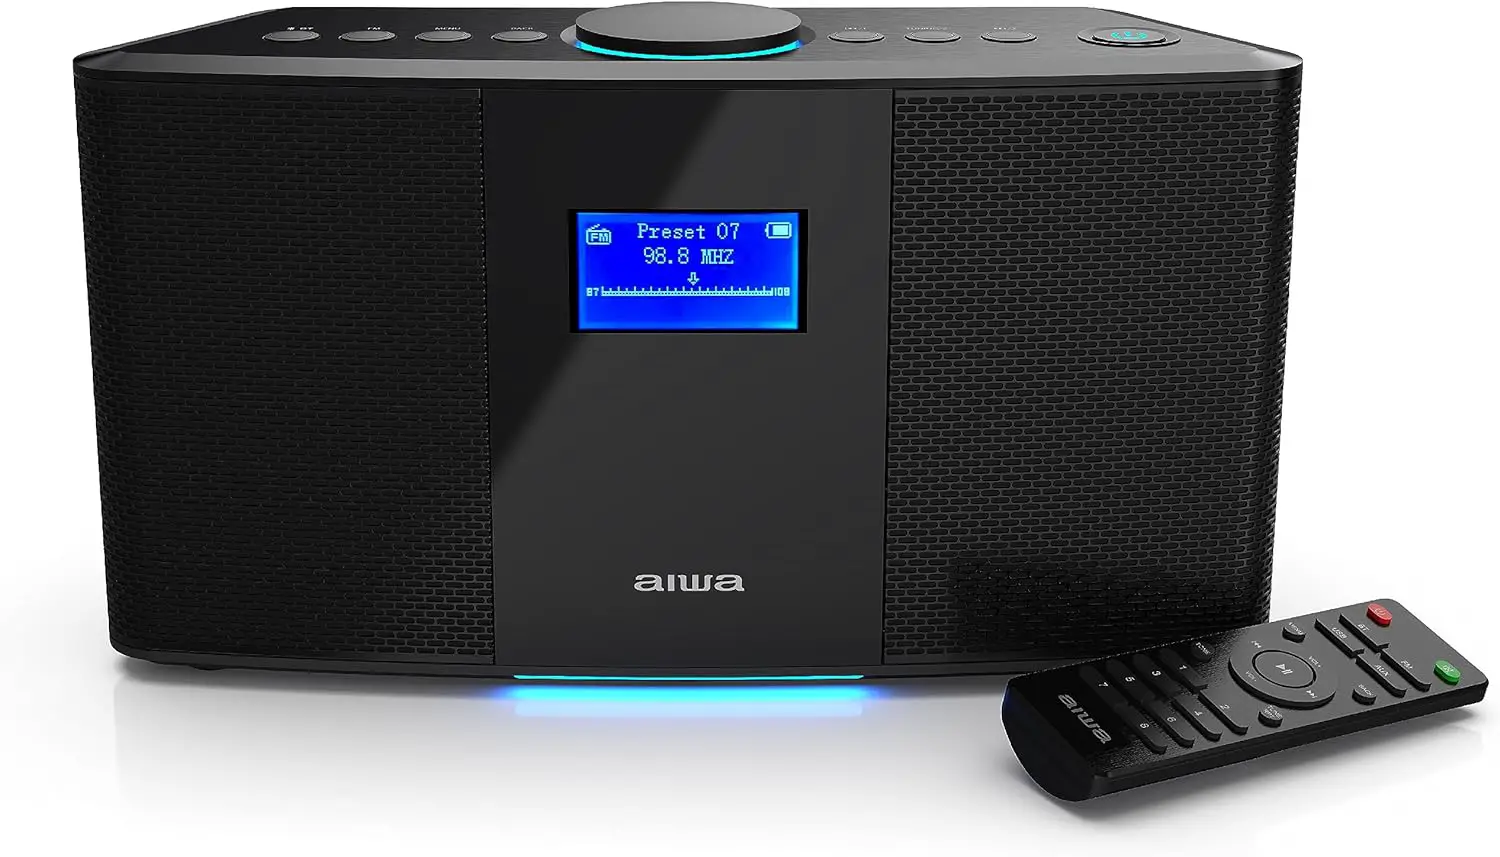 AIWA Exos 5 Wireless Speaker - Unleash Powerful Sound and Versatile Connectivity - Experience Bluetooth Freedom, FM Radio, Clock, 20W RMS, LCD Display, and Alarm Clock Functionality
